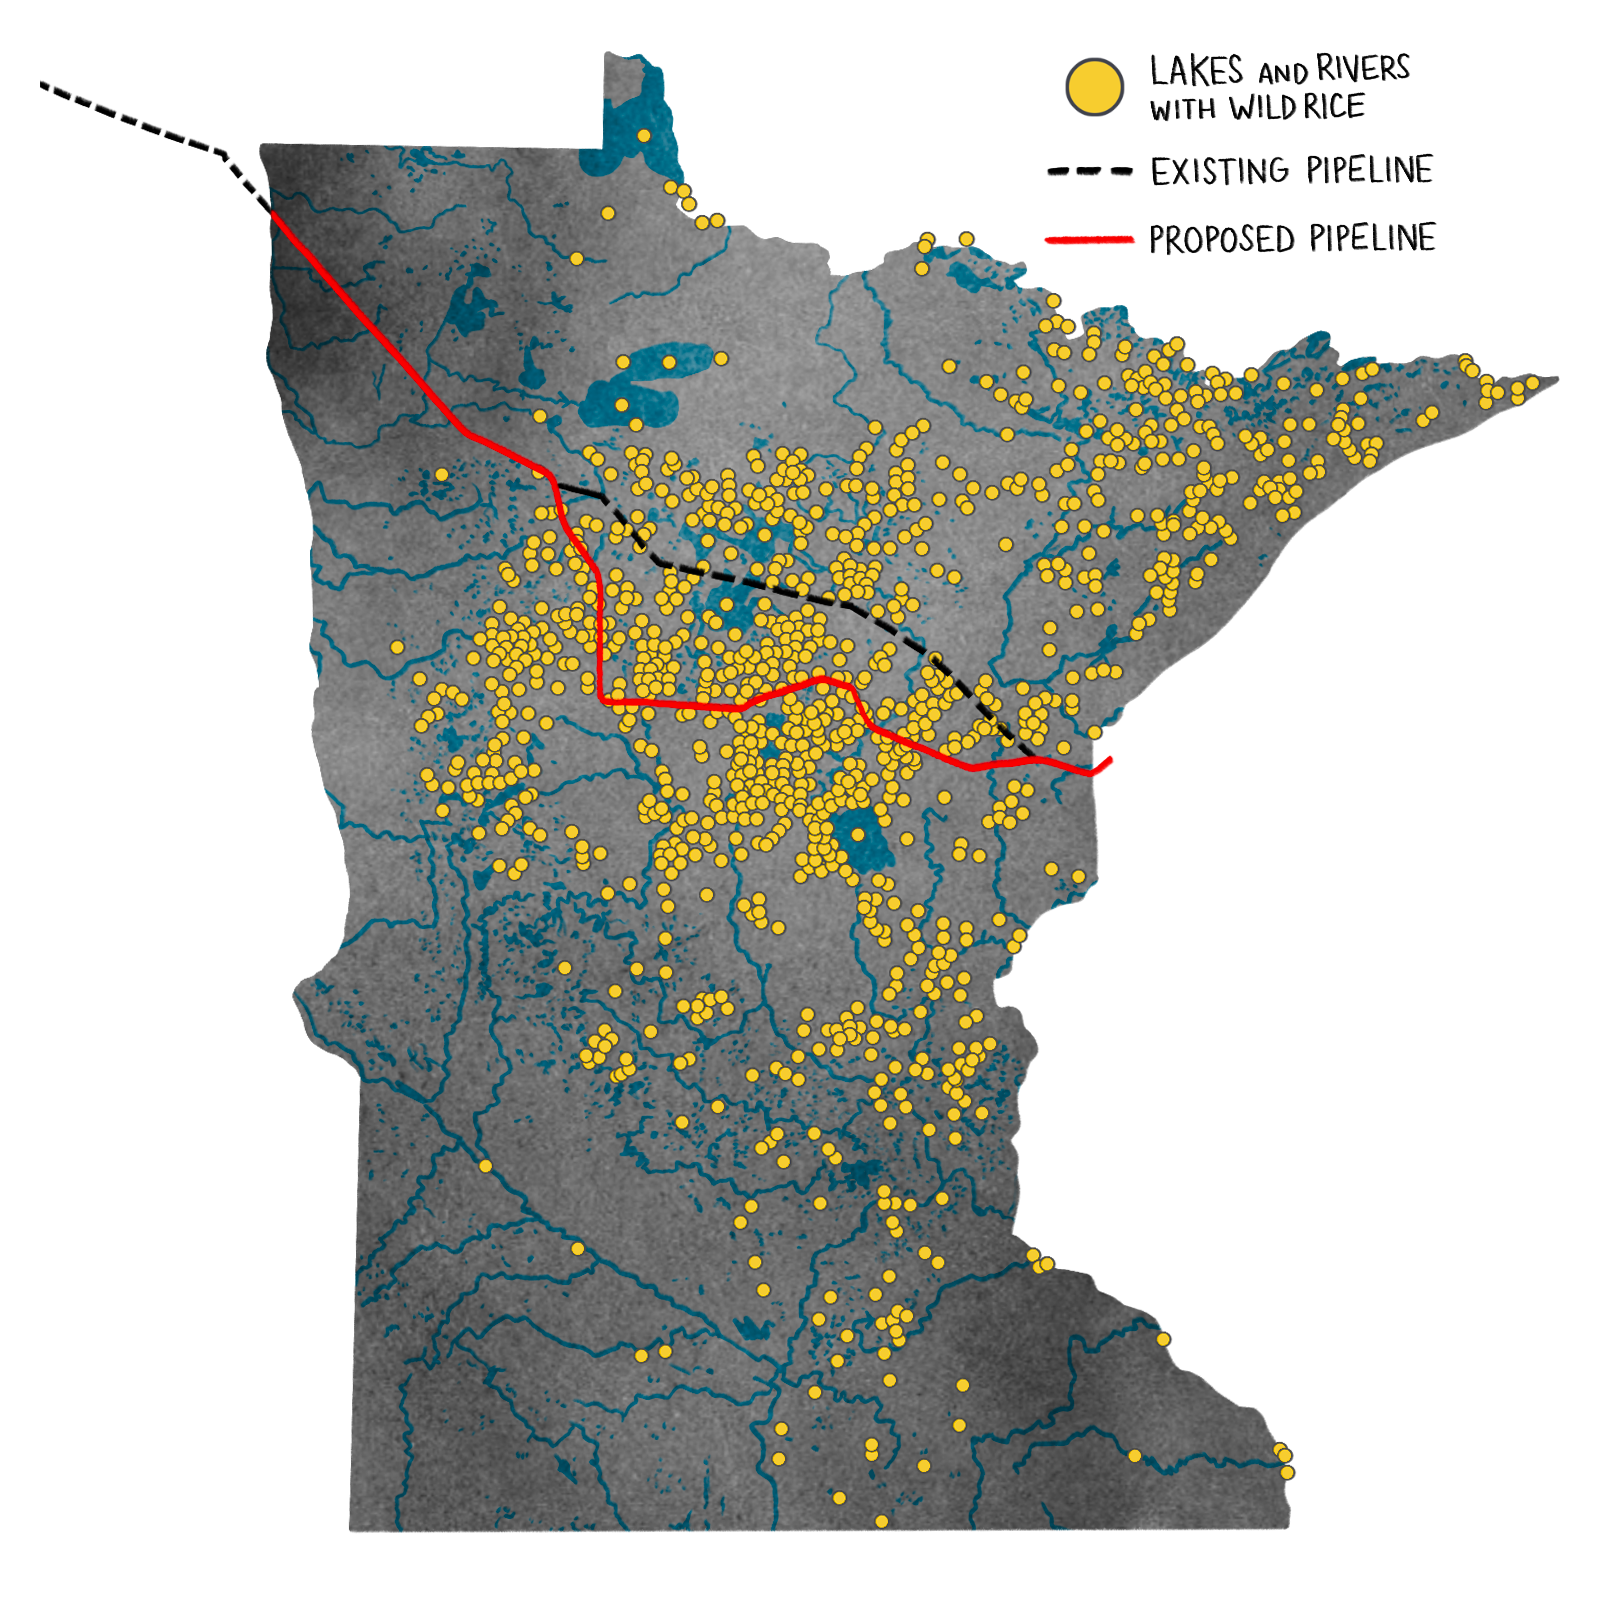 a map of Minnesota showing how the Line 3 pipeline would cut through wild rice grow areas, marked in yellow dots